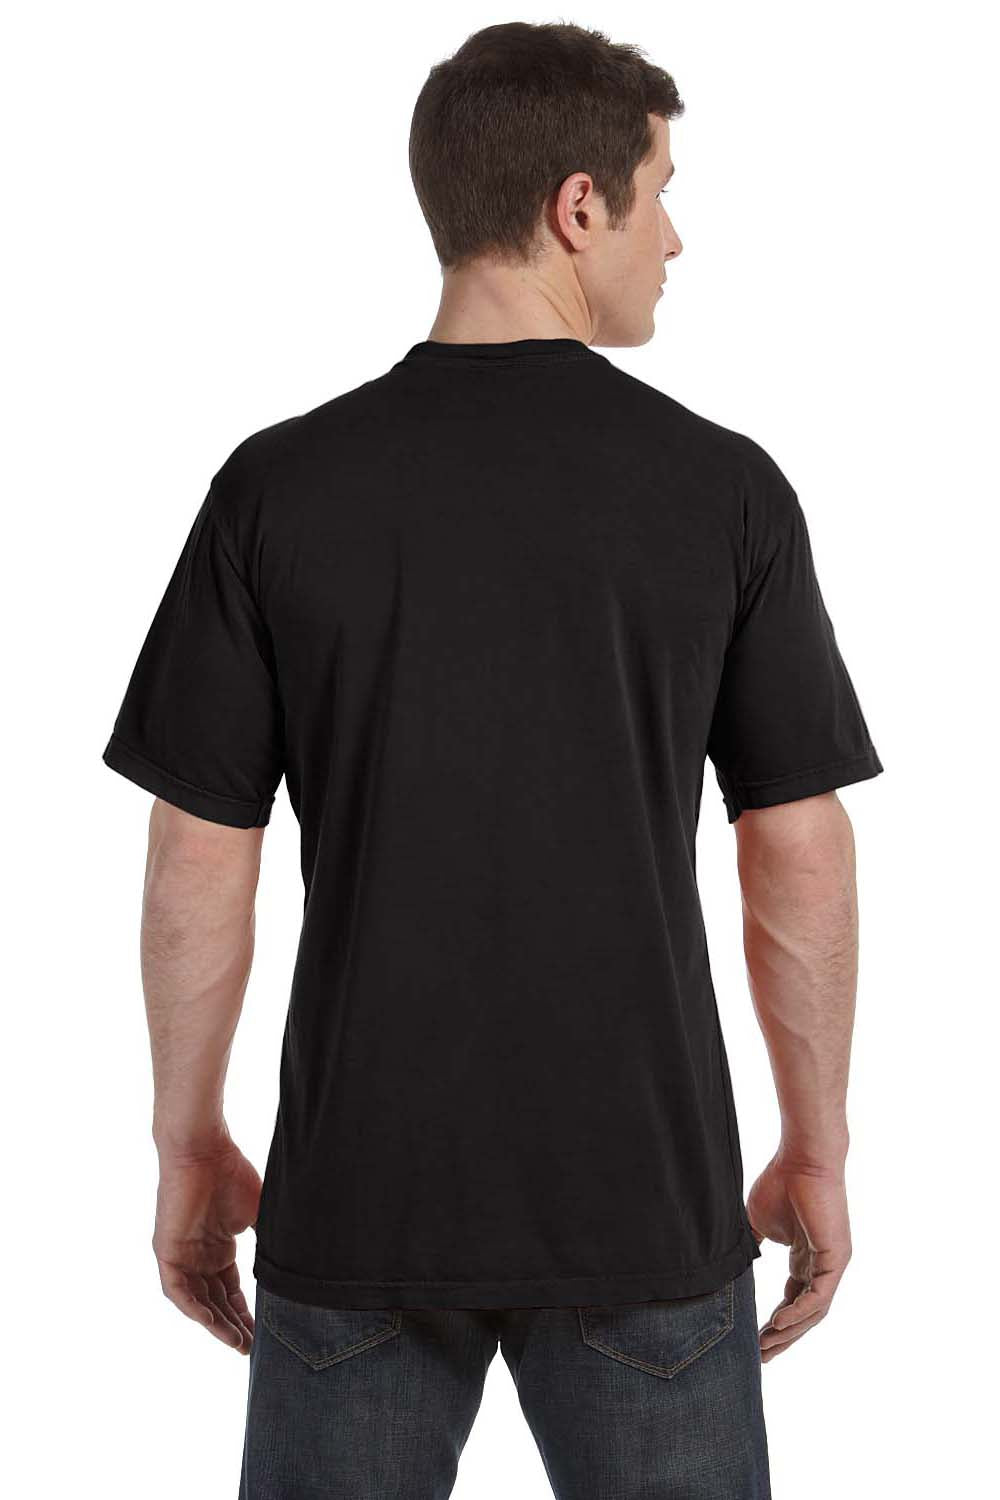 black short sleeves Coulos t-shirt